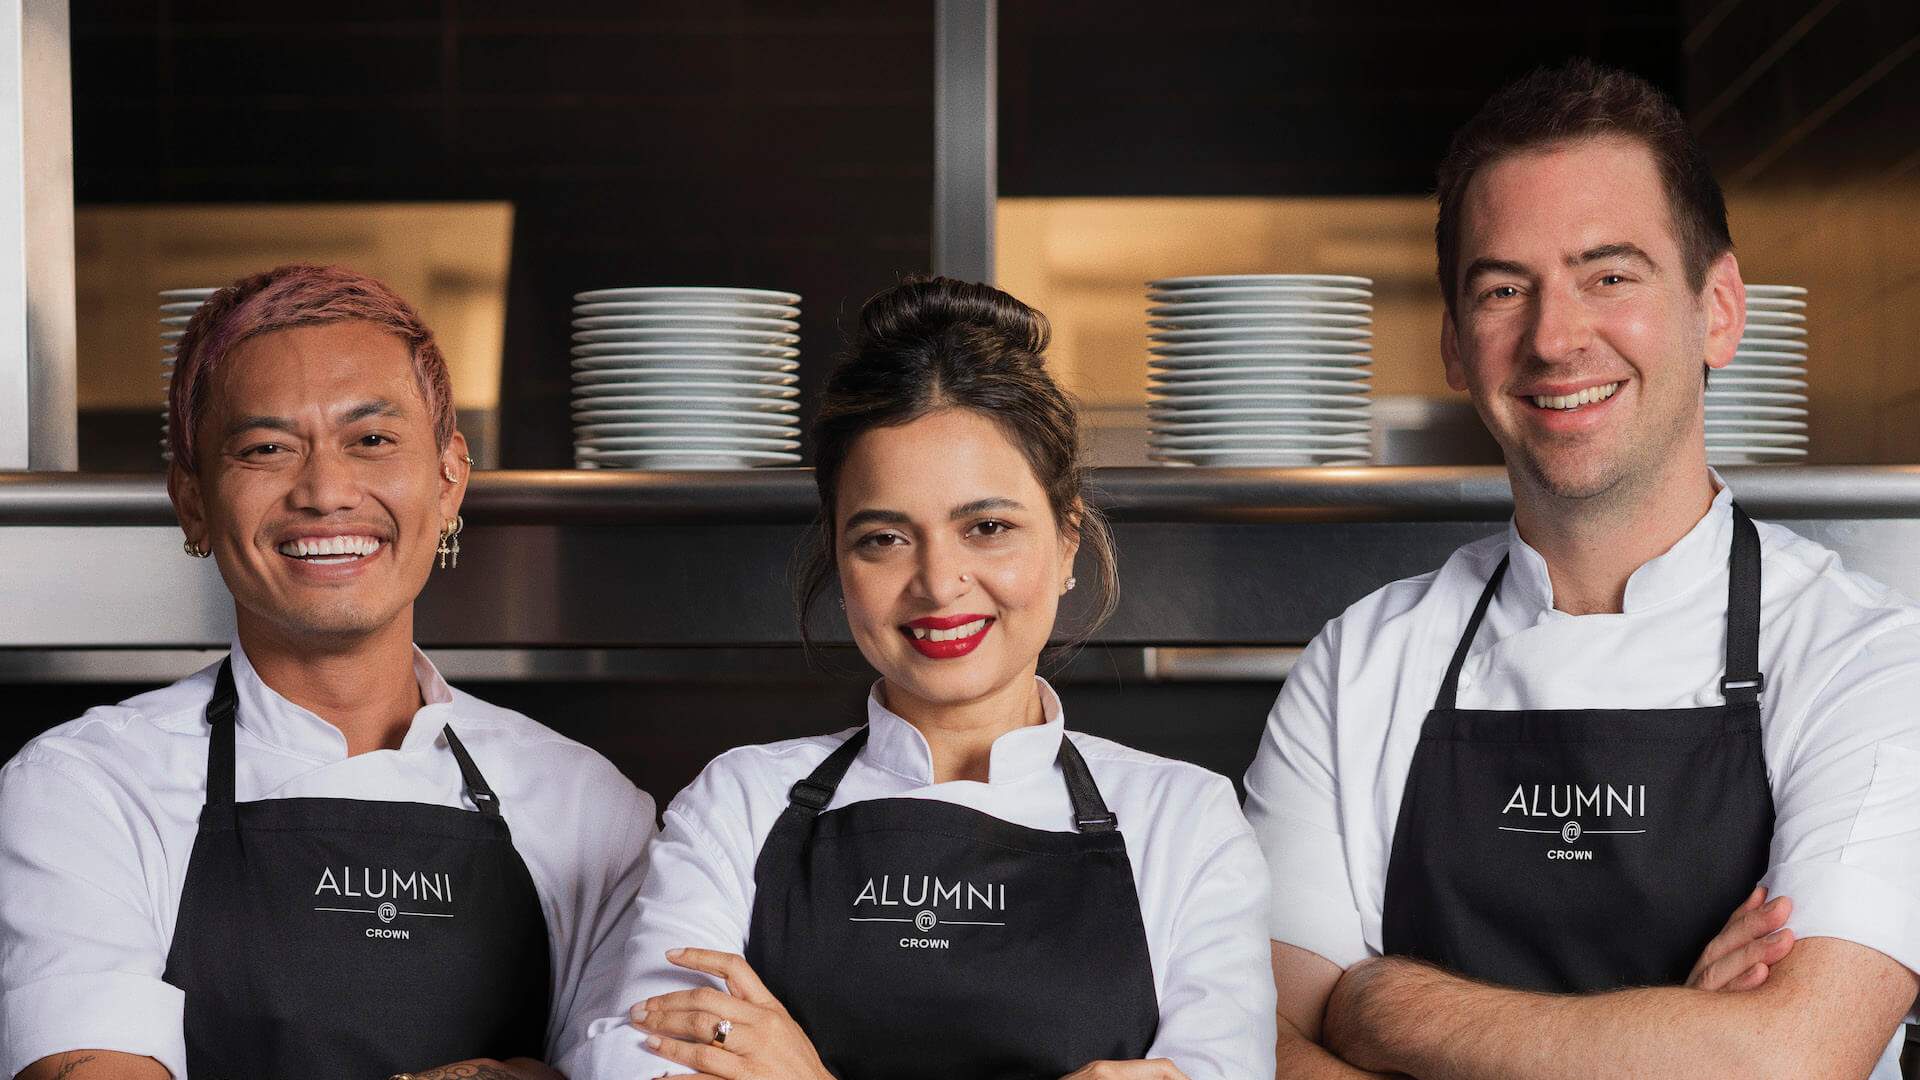 Best things to do this weekend - ALUMNI MasterChef pop-up restaurant at Crown Melbourne